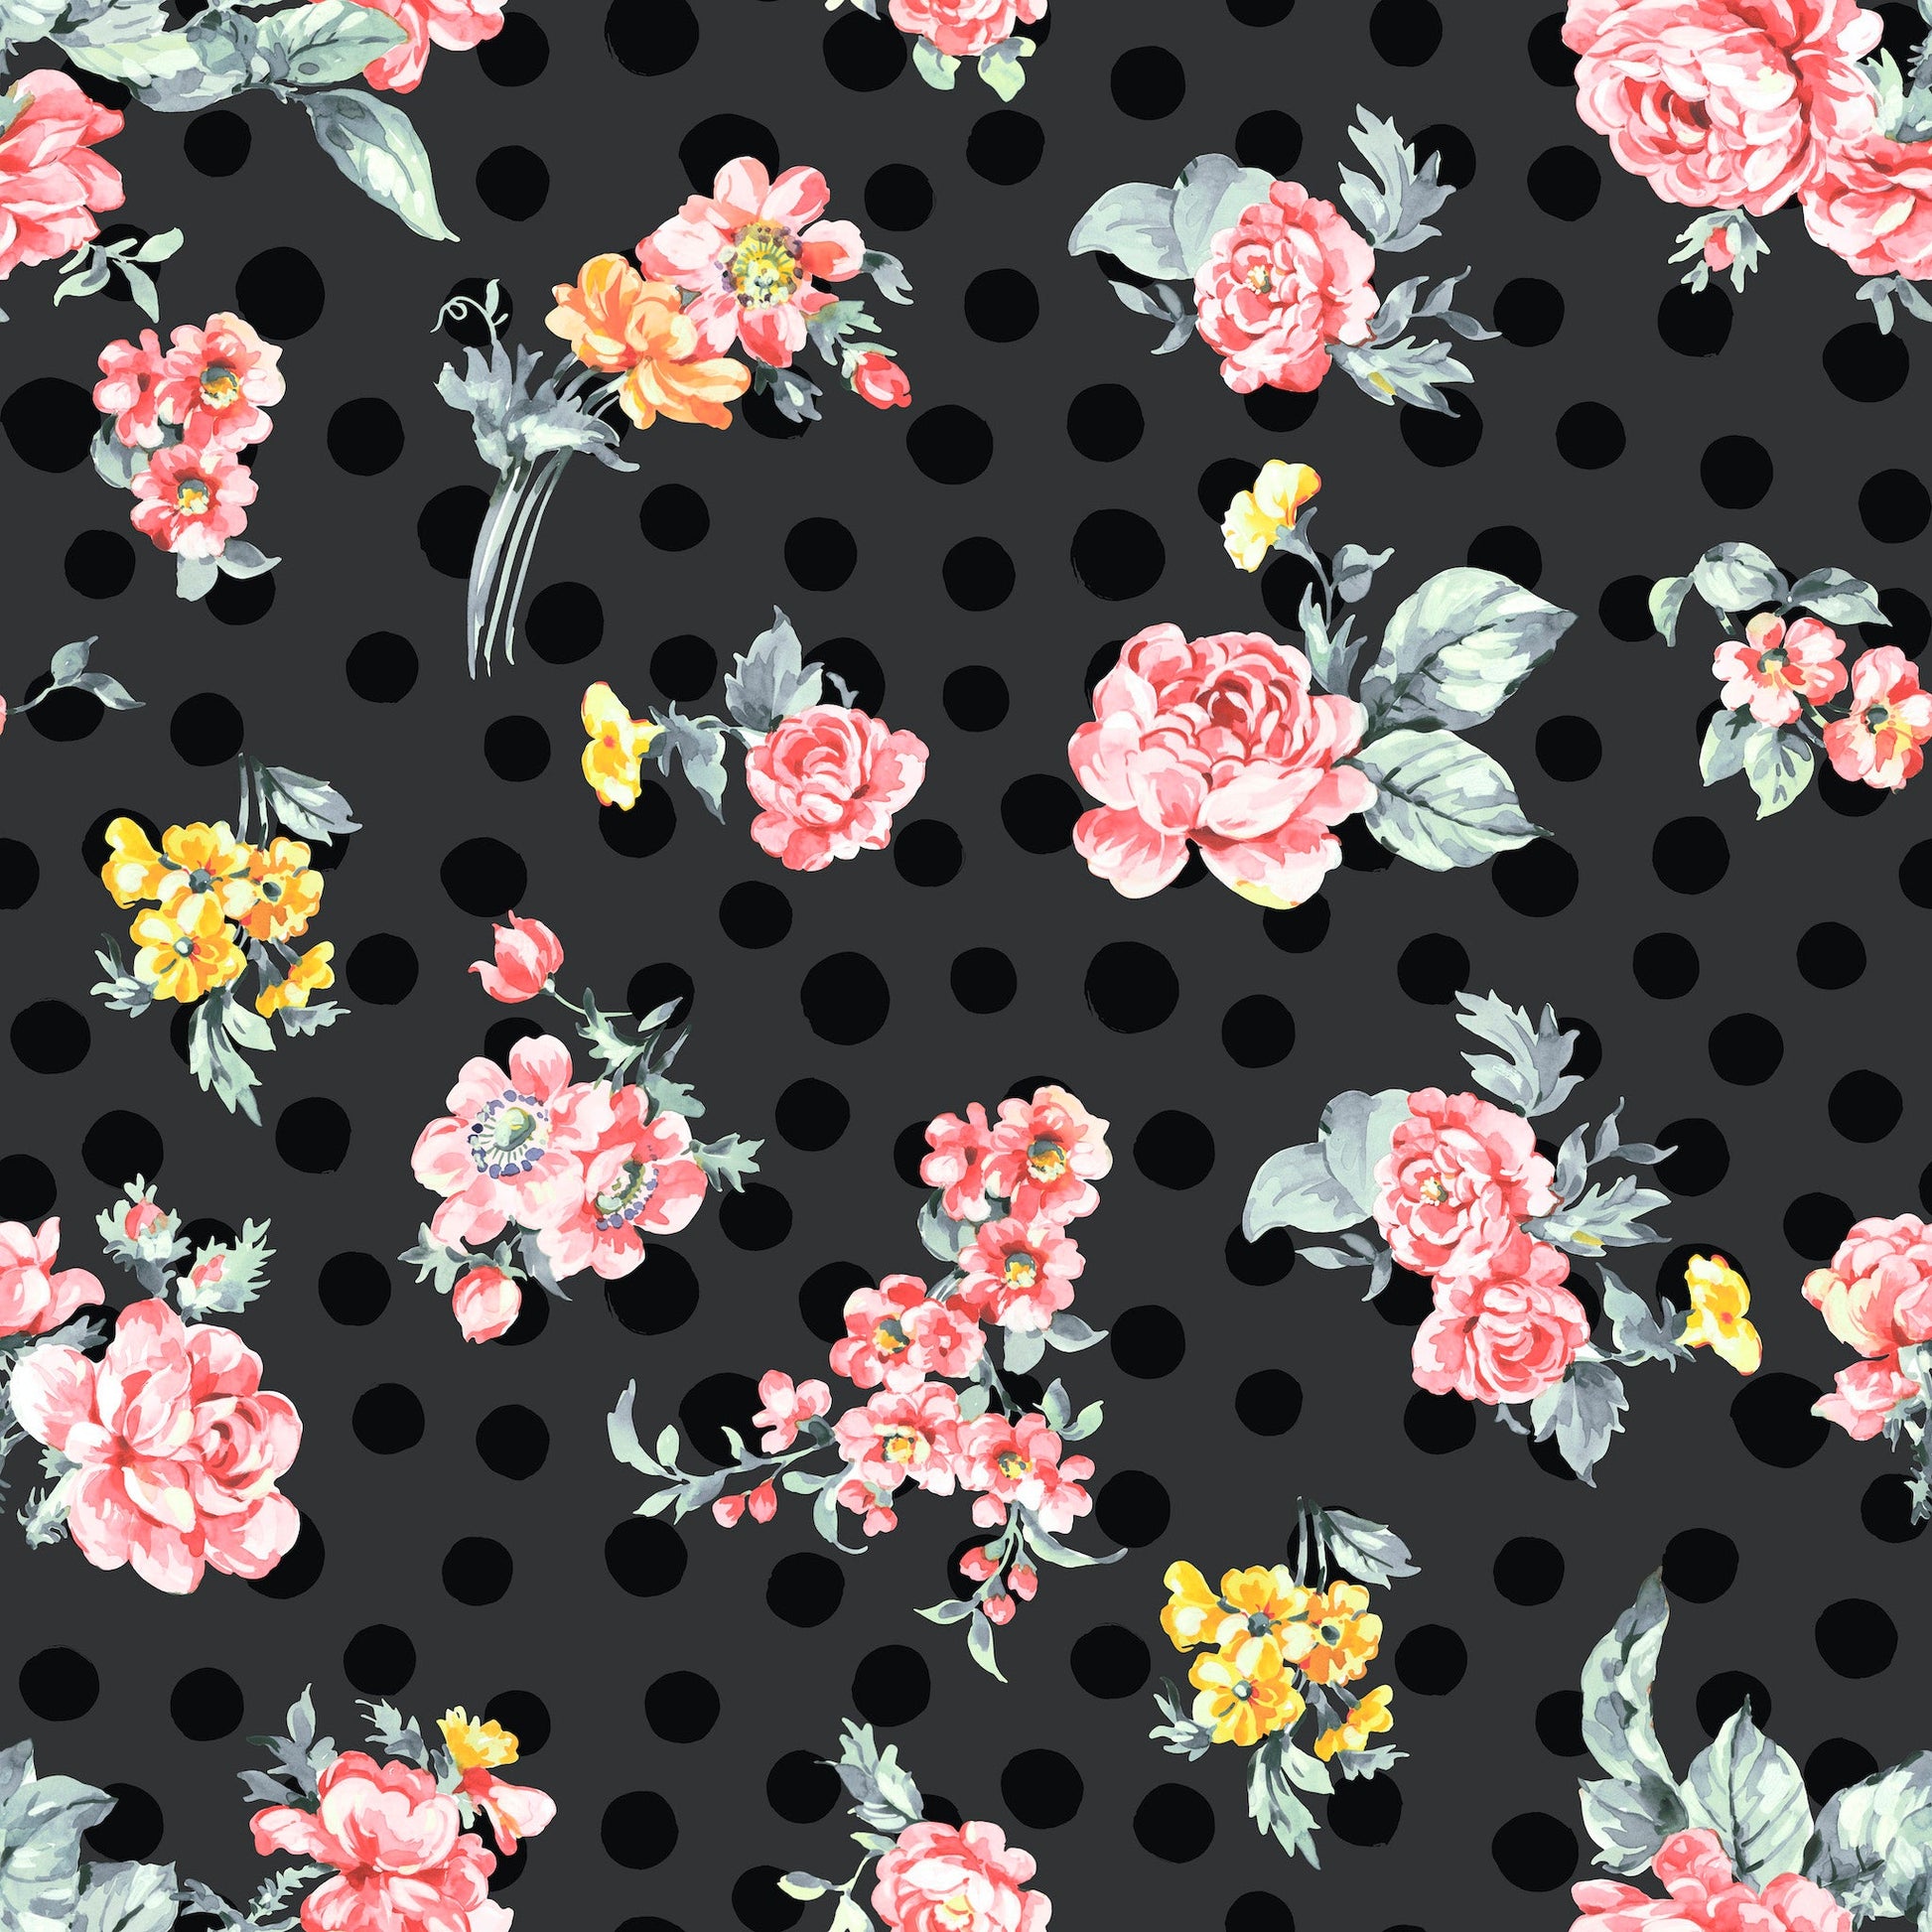 black kids polka dot chic floral peel and stick removable fabric wallpaper